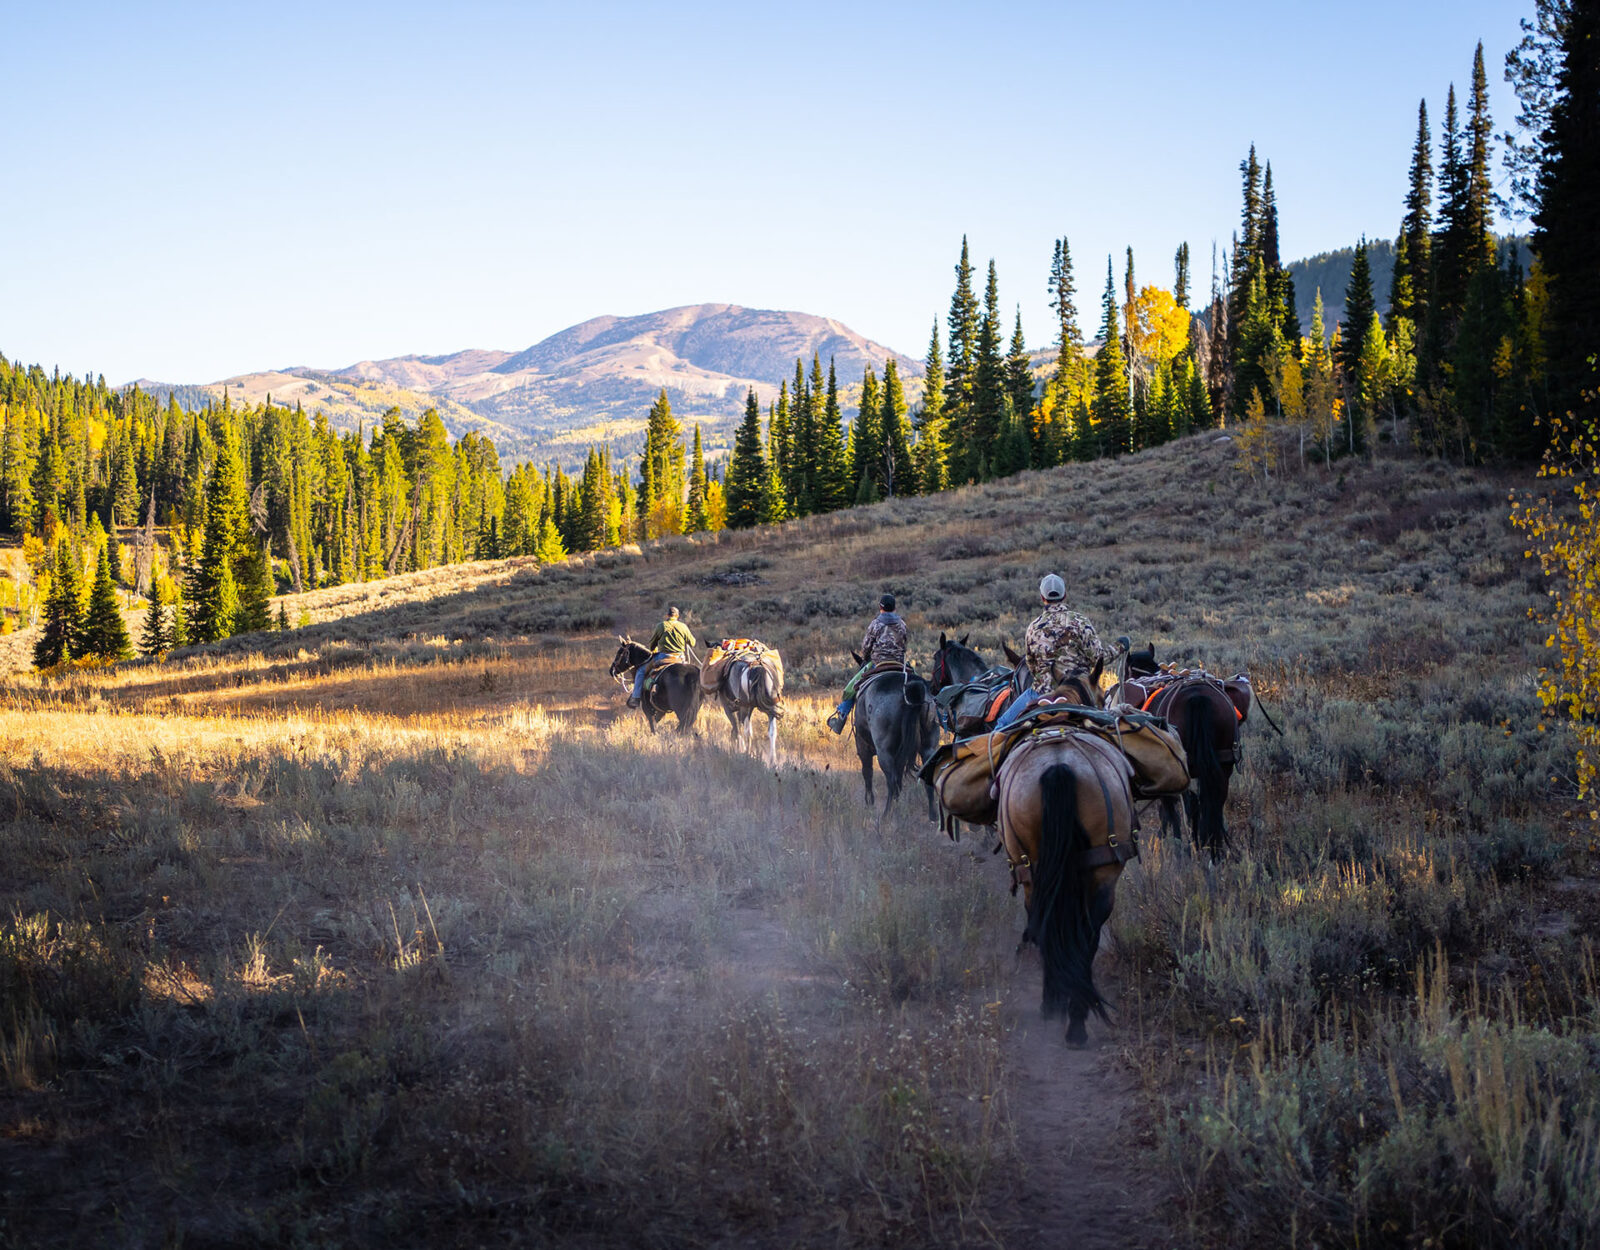 A pack train of horses moves along a single track in the mountains. Three of the horses carry horseback riders. 